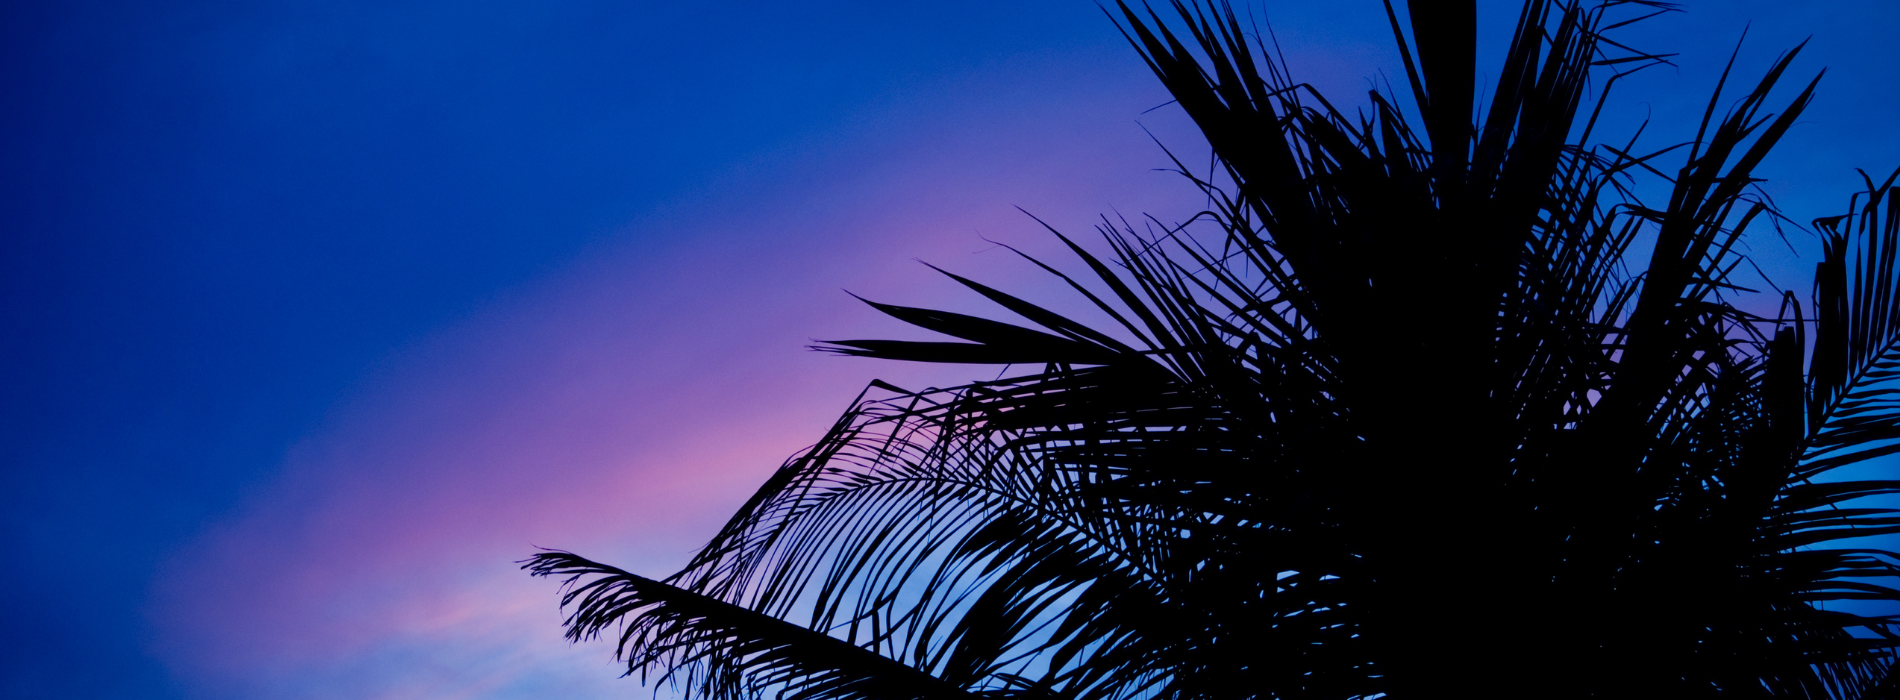 Blue, Purple, Pink Sunset with a Palm Tree in South Florida